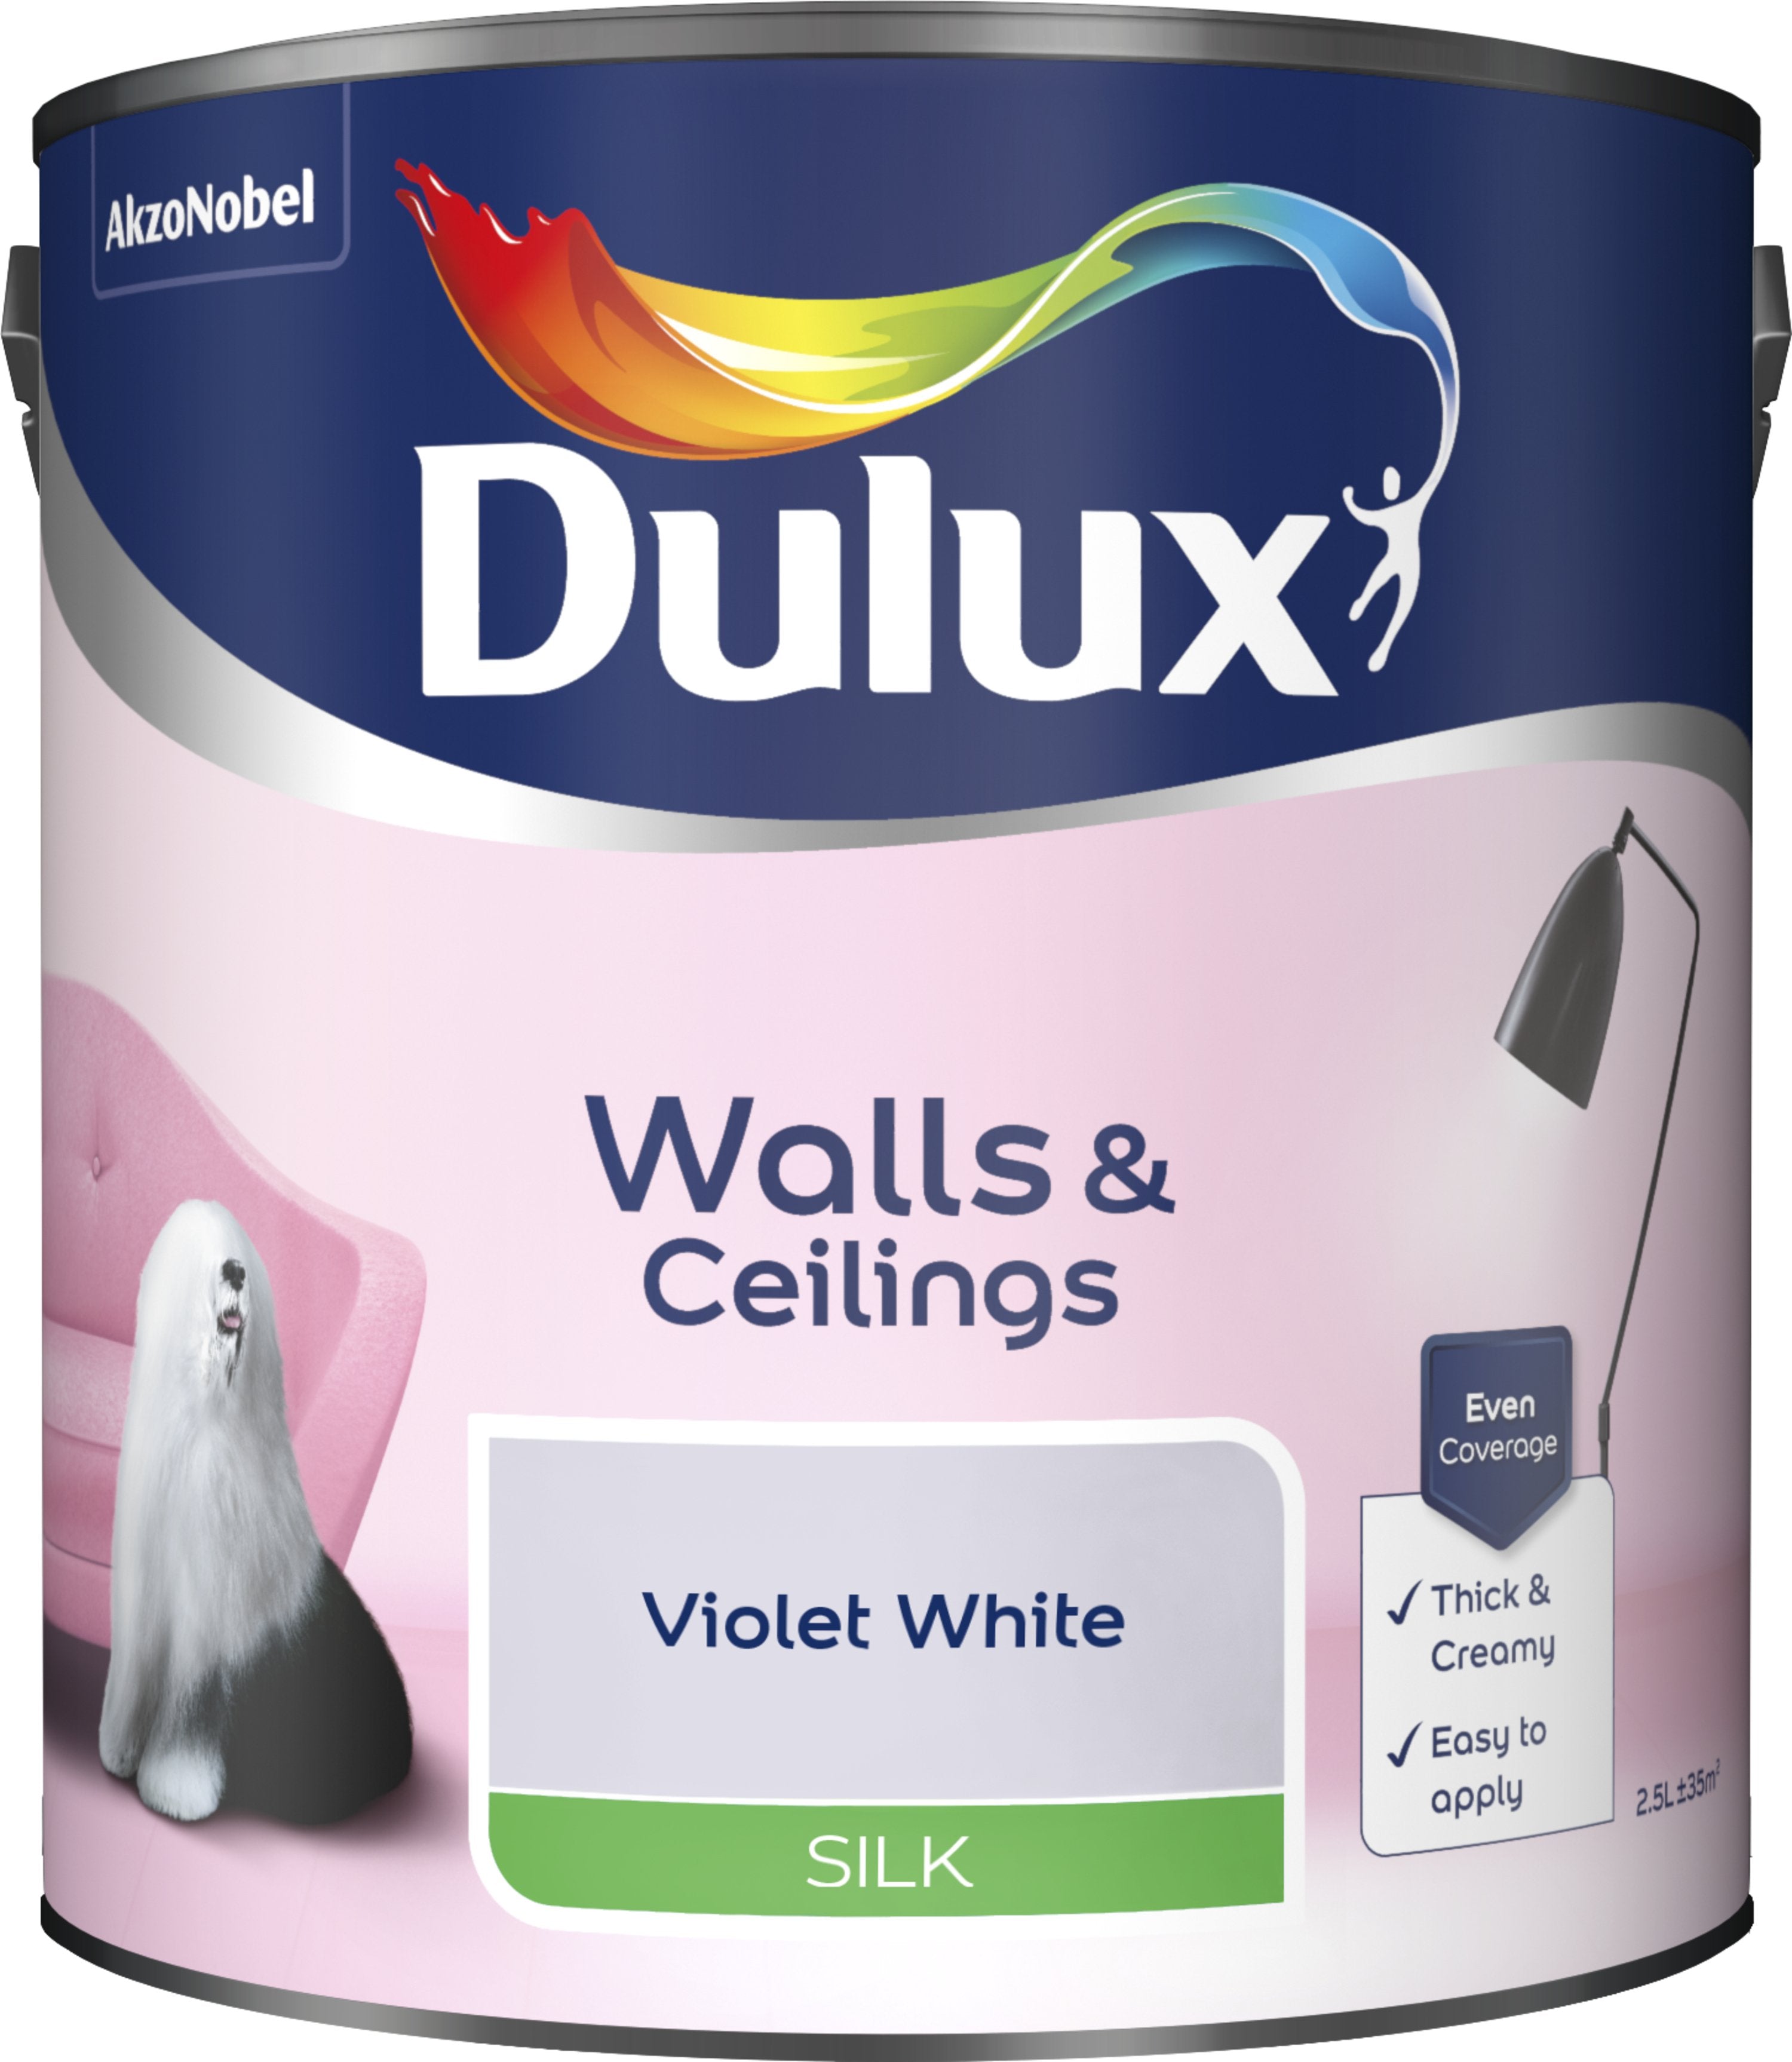 Dulux Silk Emulsion Paint For Walls And Ceilings - Violet White 2.5L Garden & Diy Home Improvements